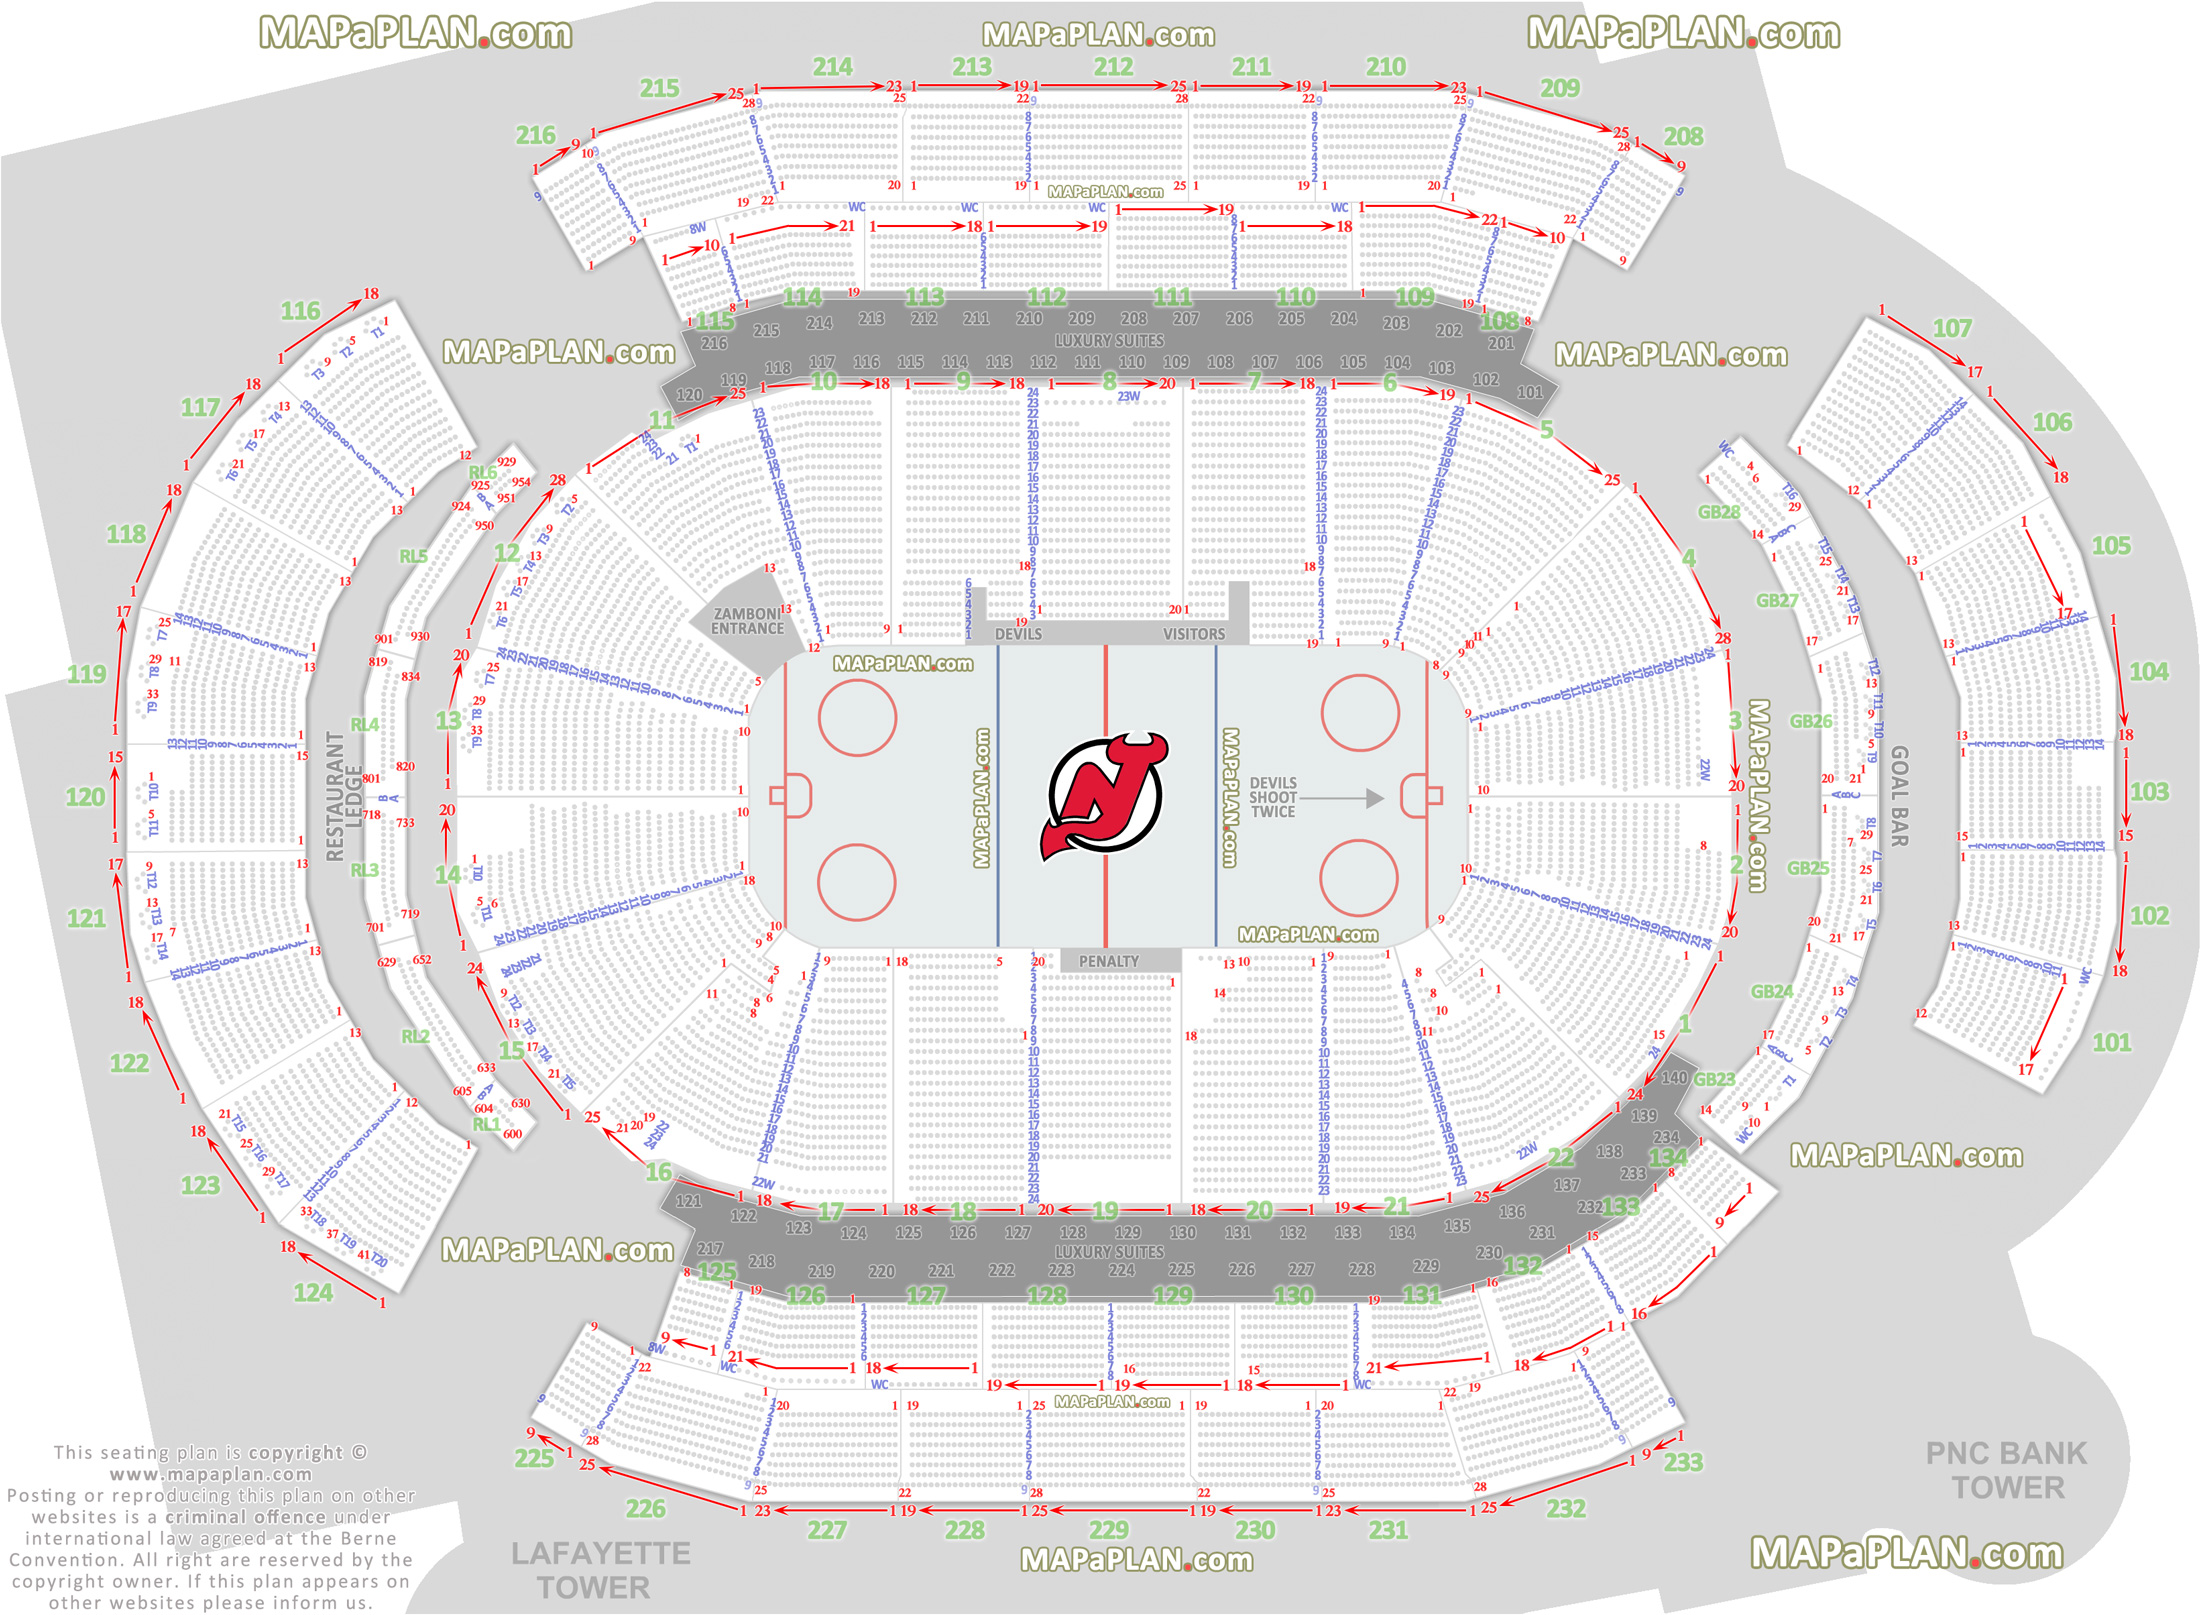 new jersey devils arena seating chart